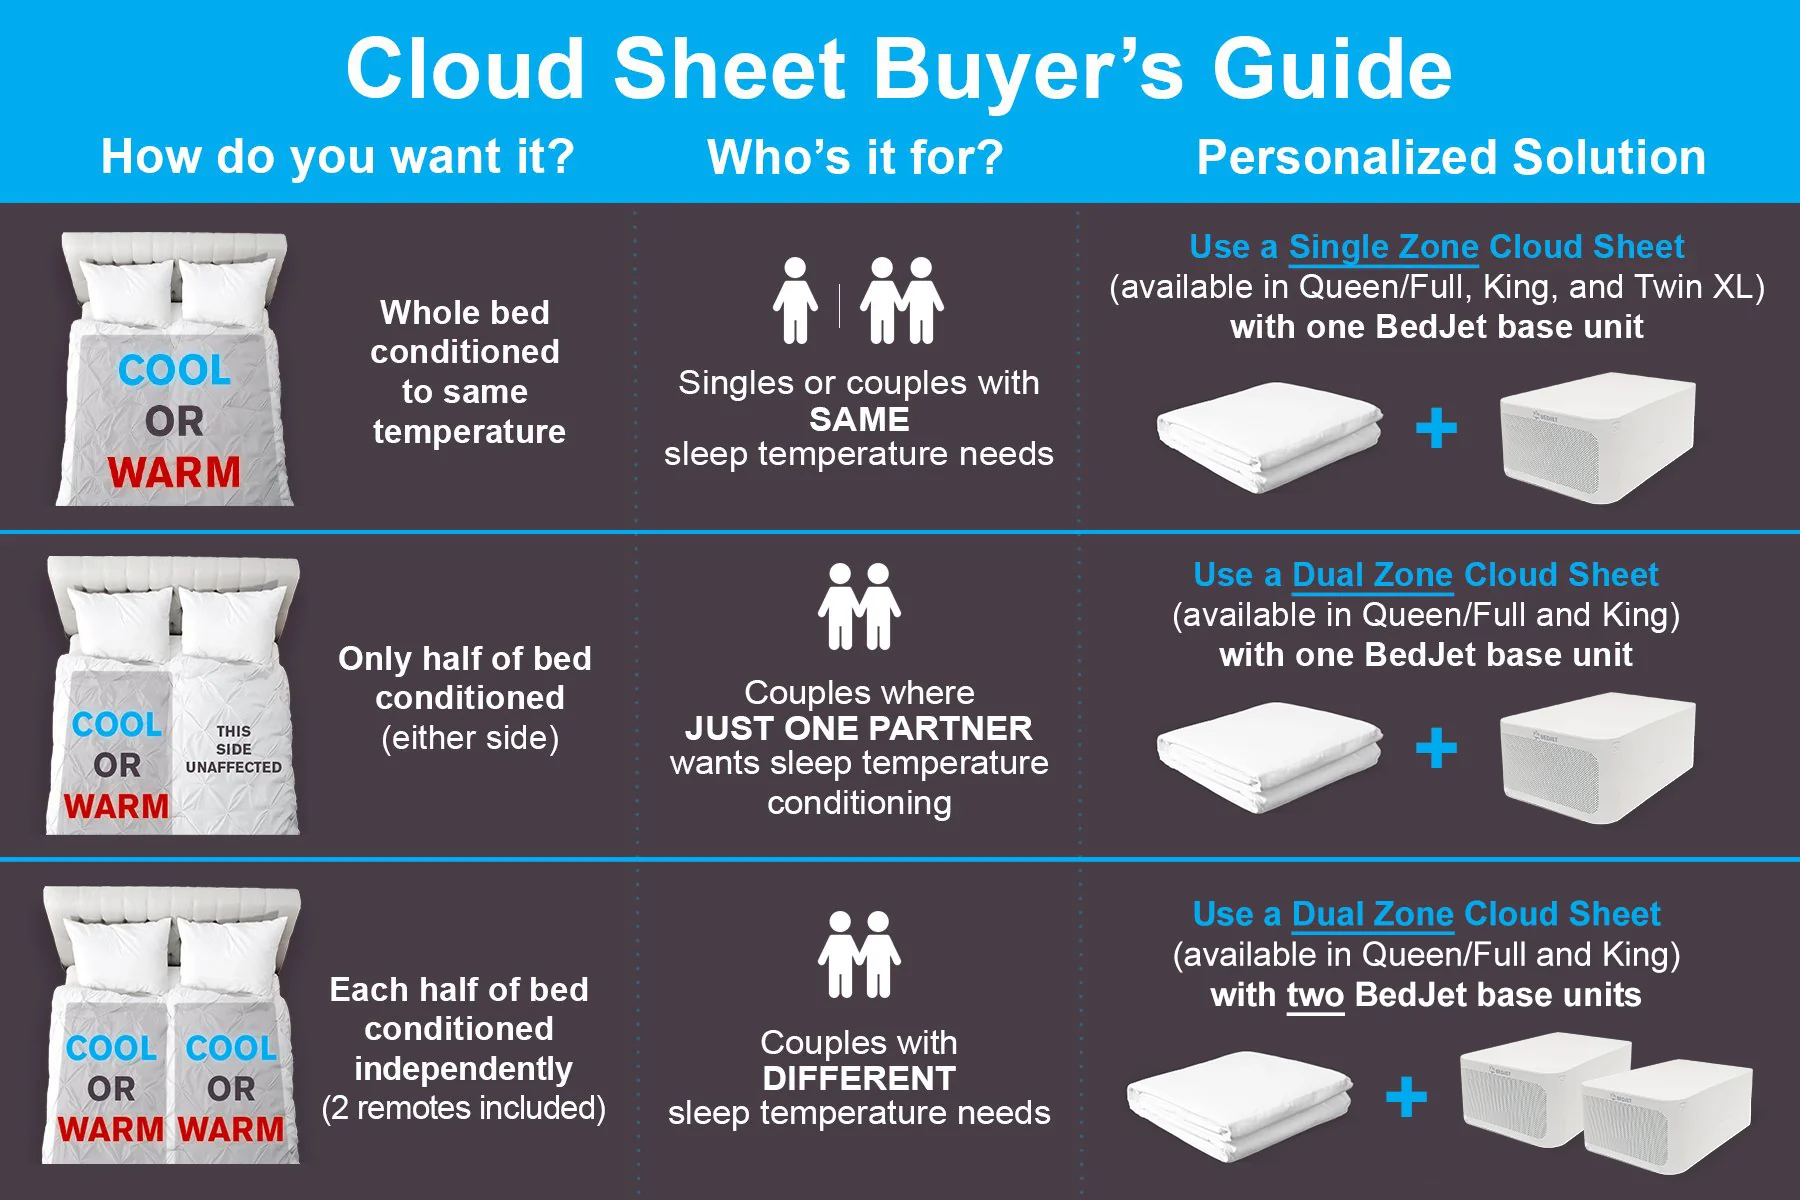 An image for a cloud sheet buyer guide